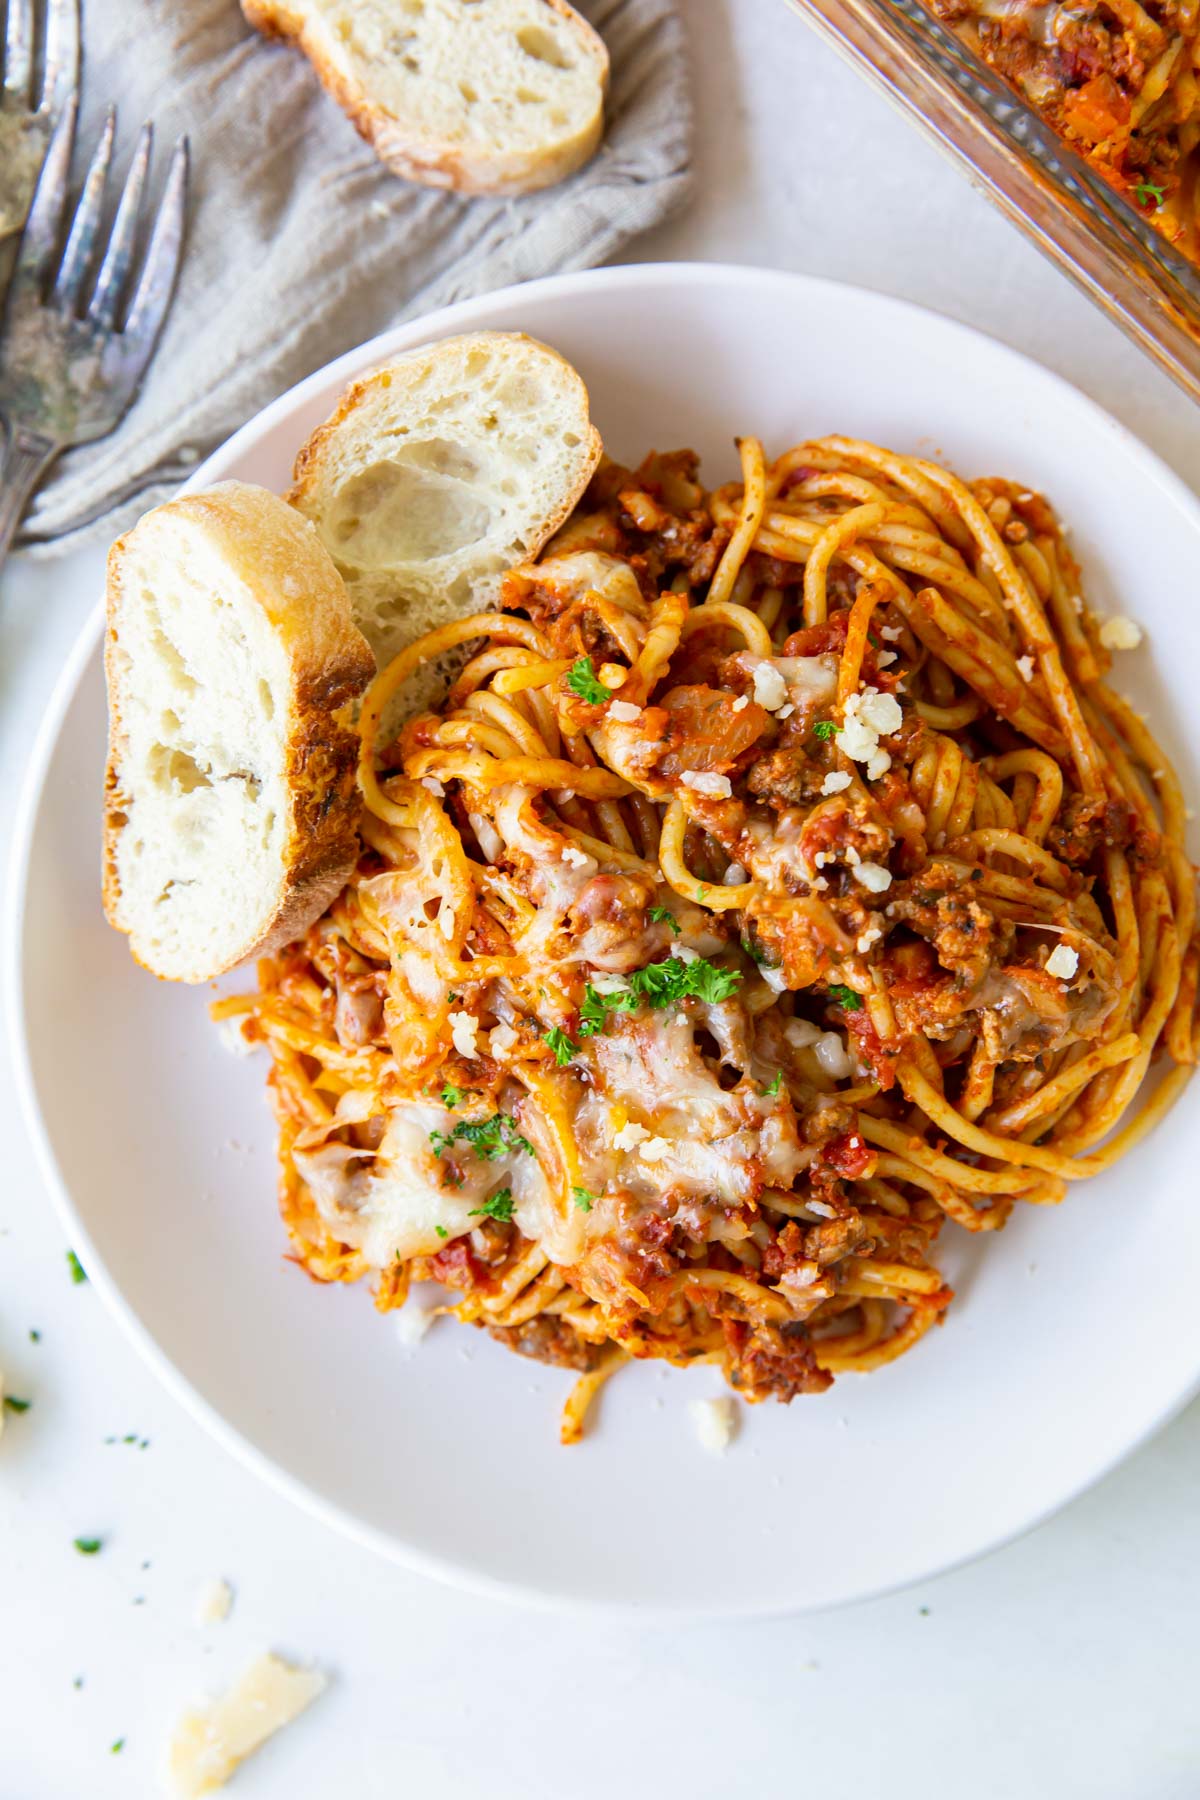 Serving of baked spaghetti on a plate with sliced bread.